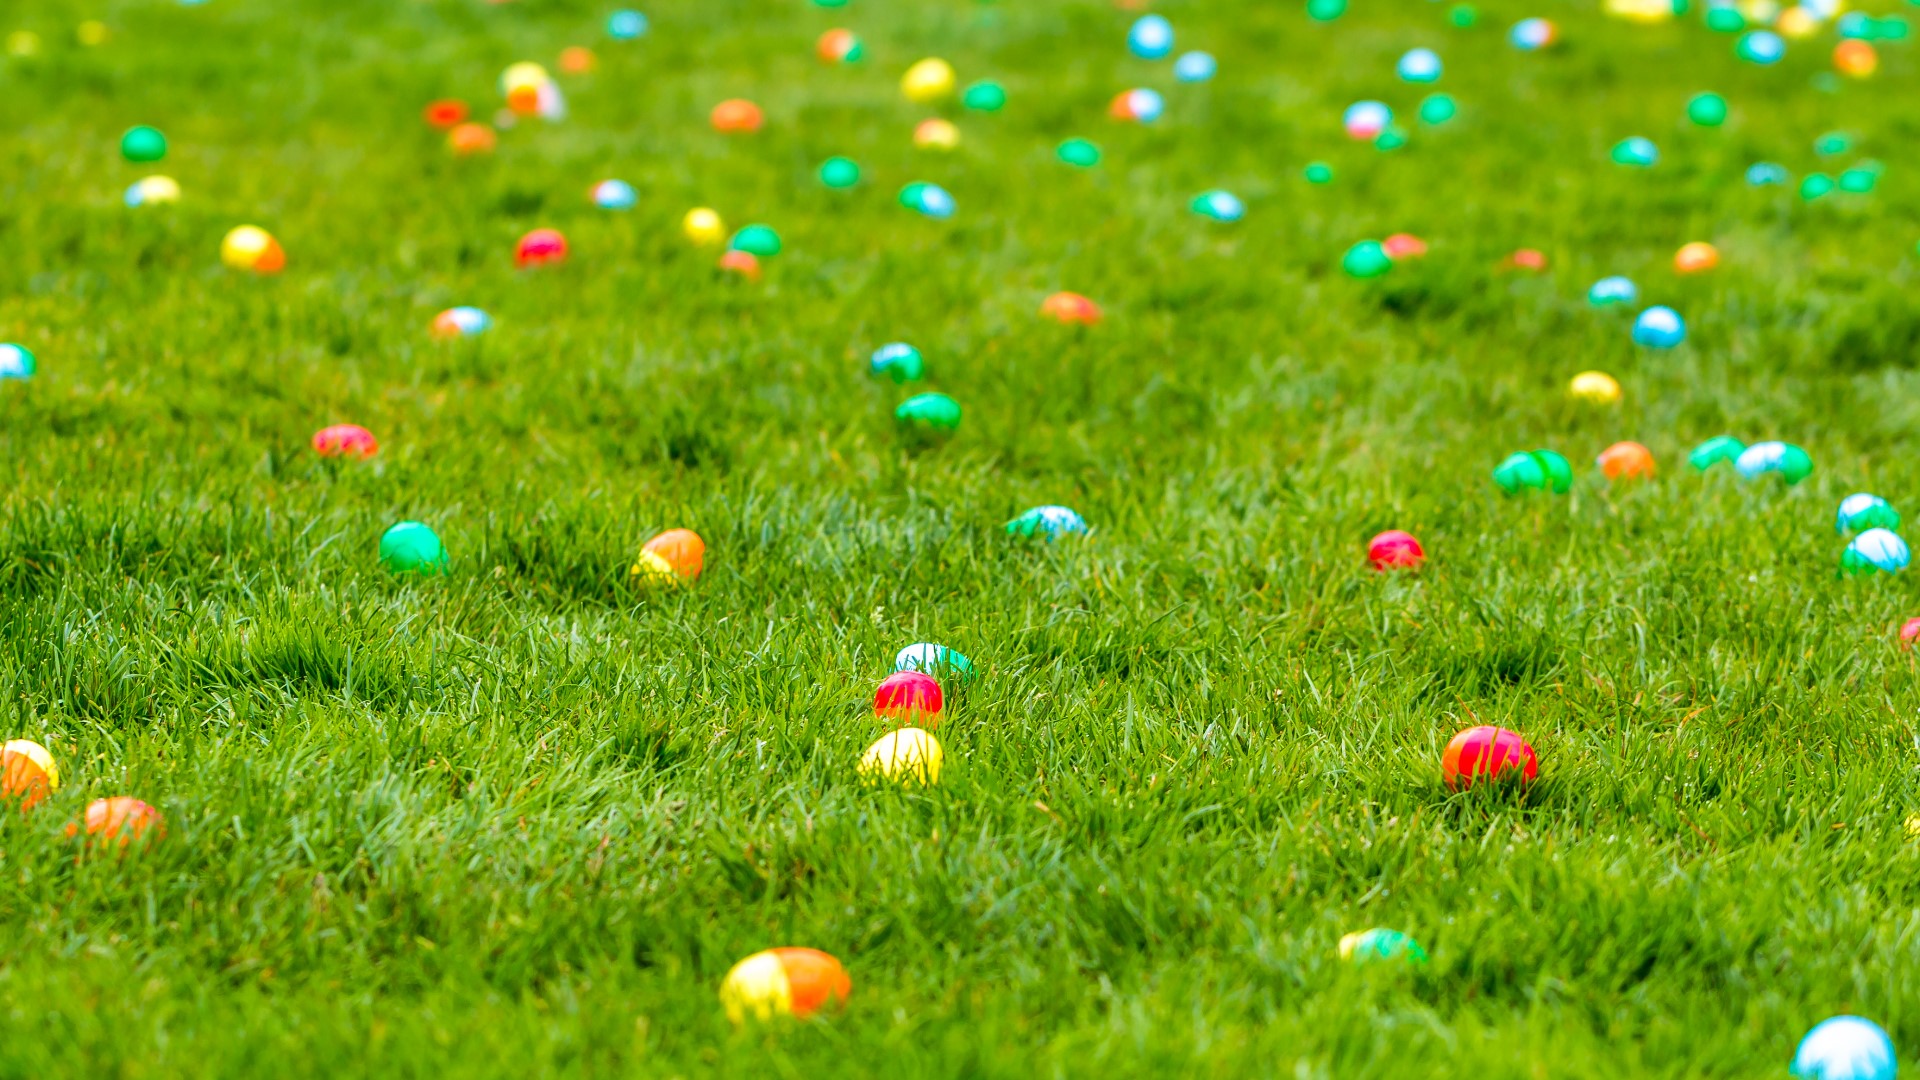 Here's everything you need to know about Easter Egg hunts in central Iowa.